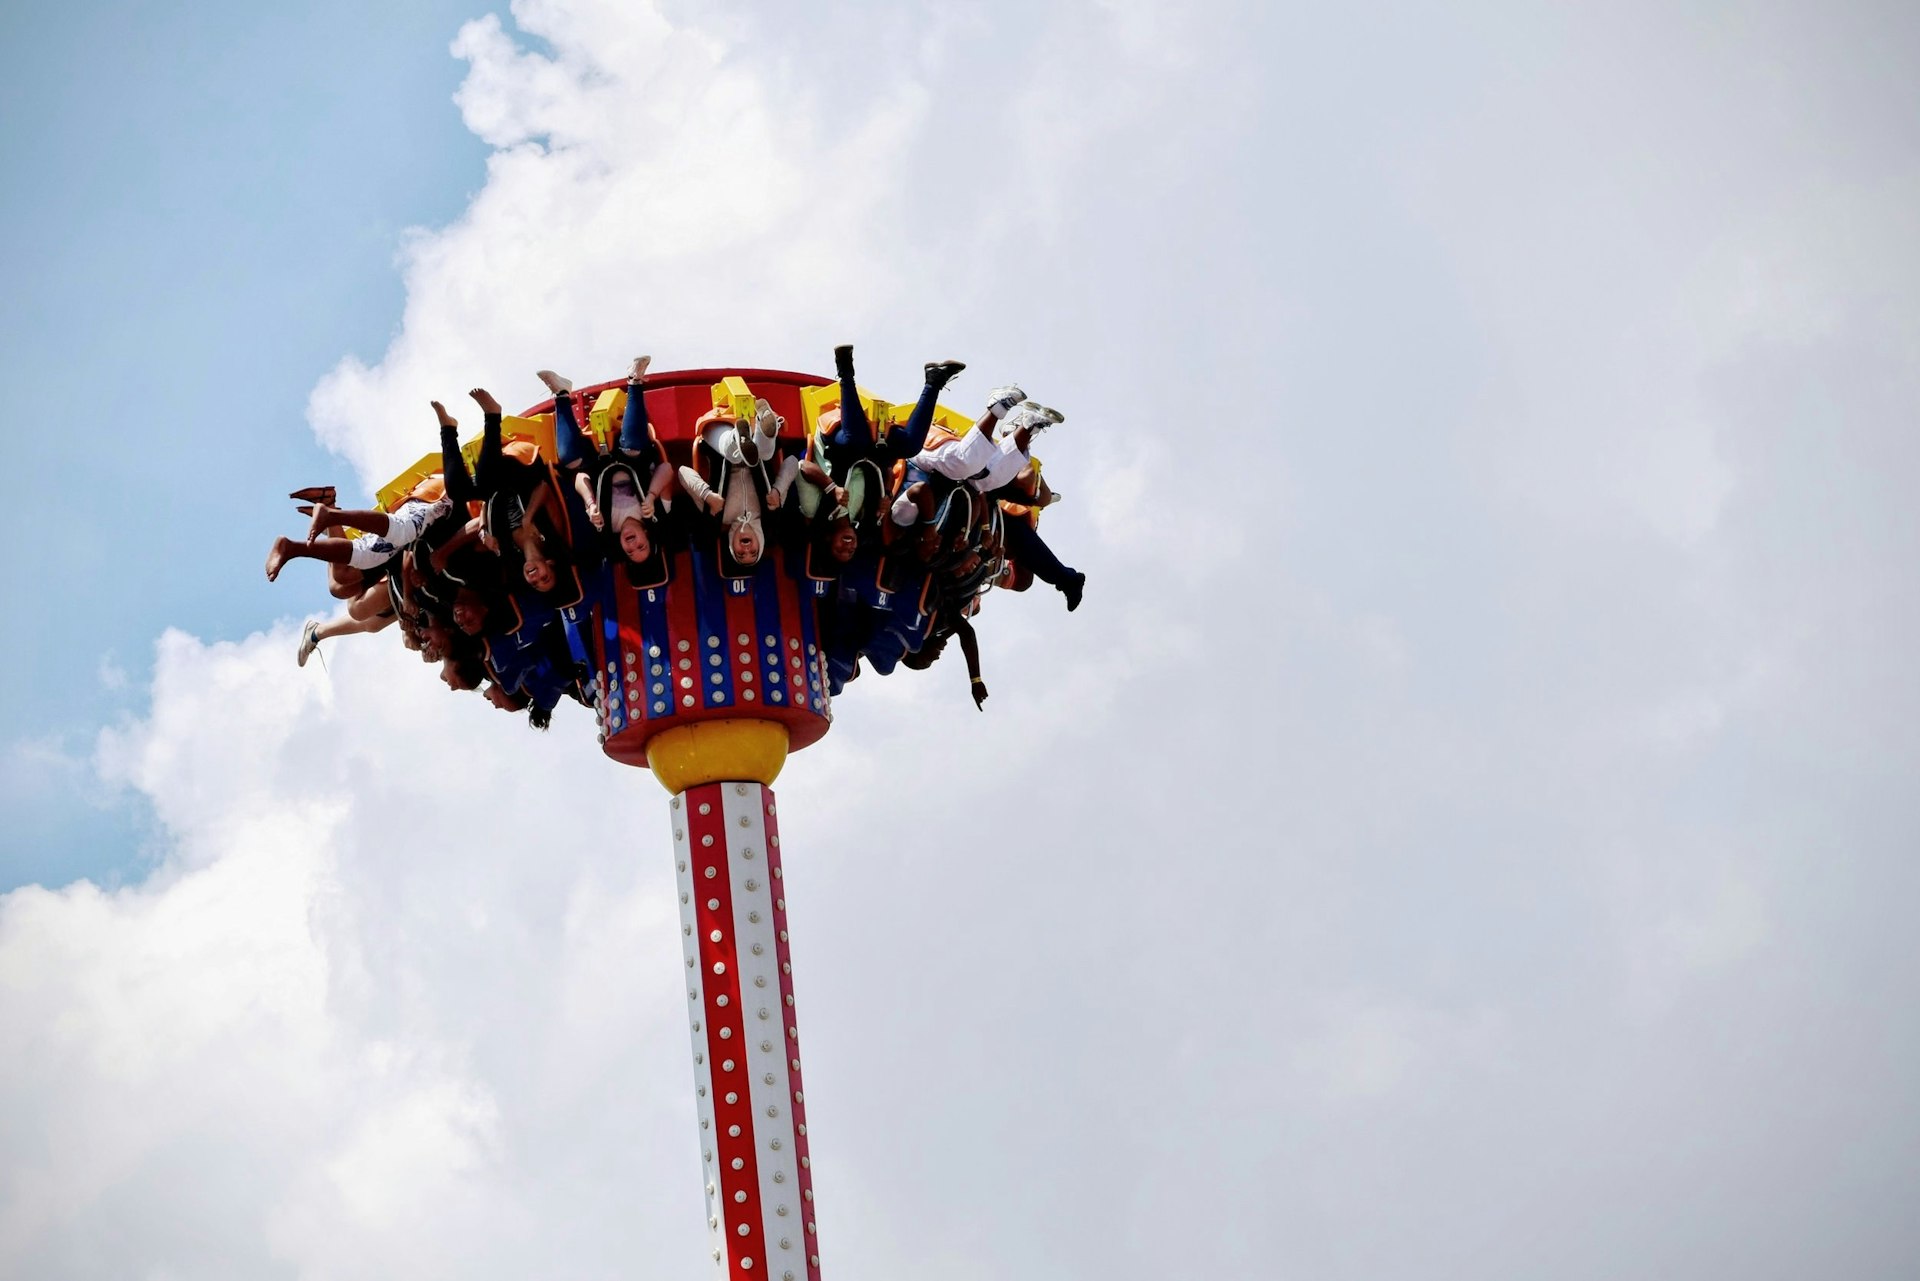 Photo of an amusement park ride holding people upside down, while strapped in their chairs.